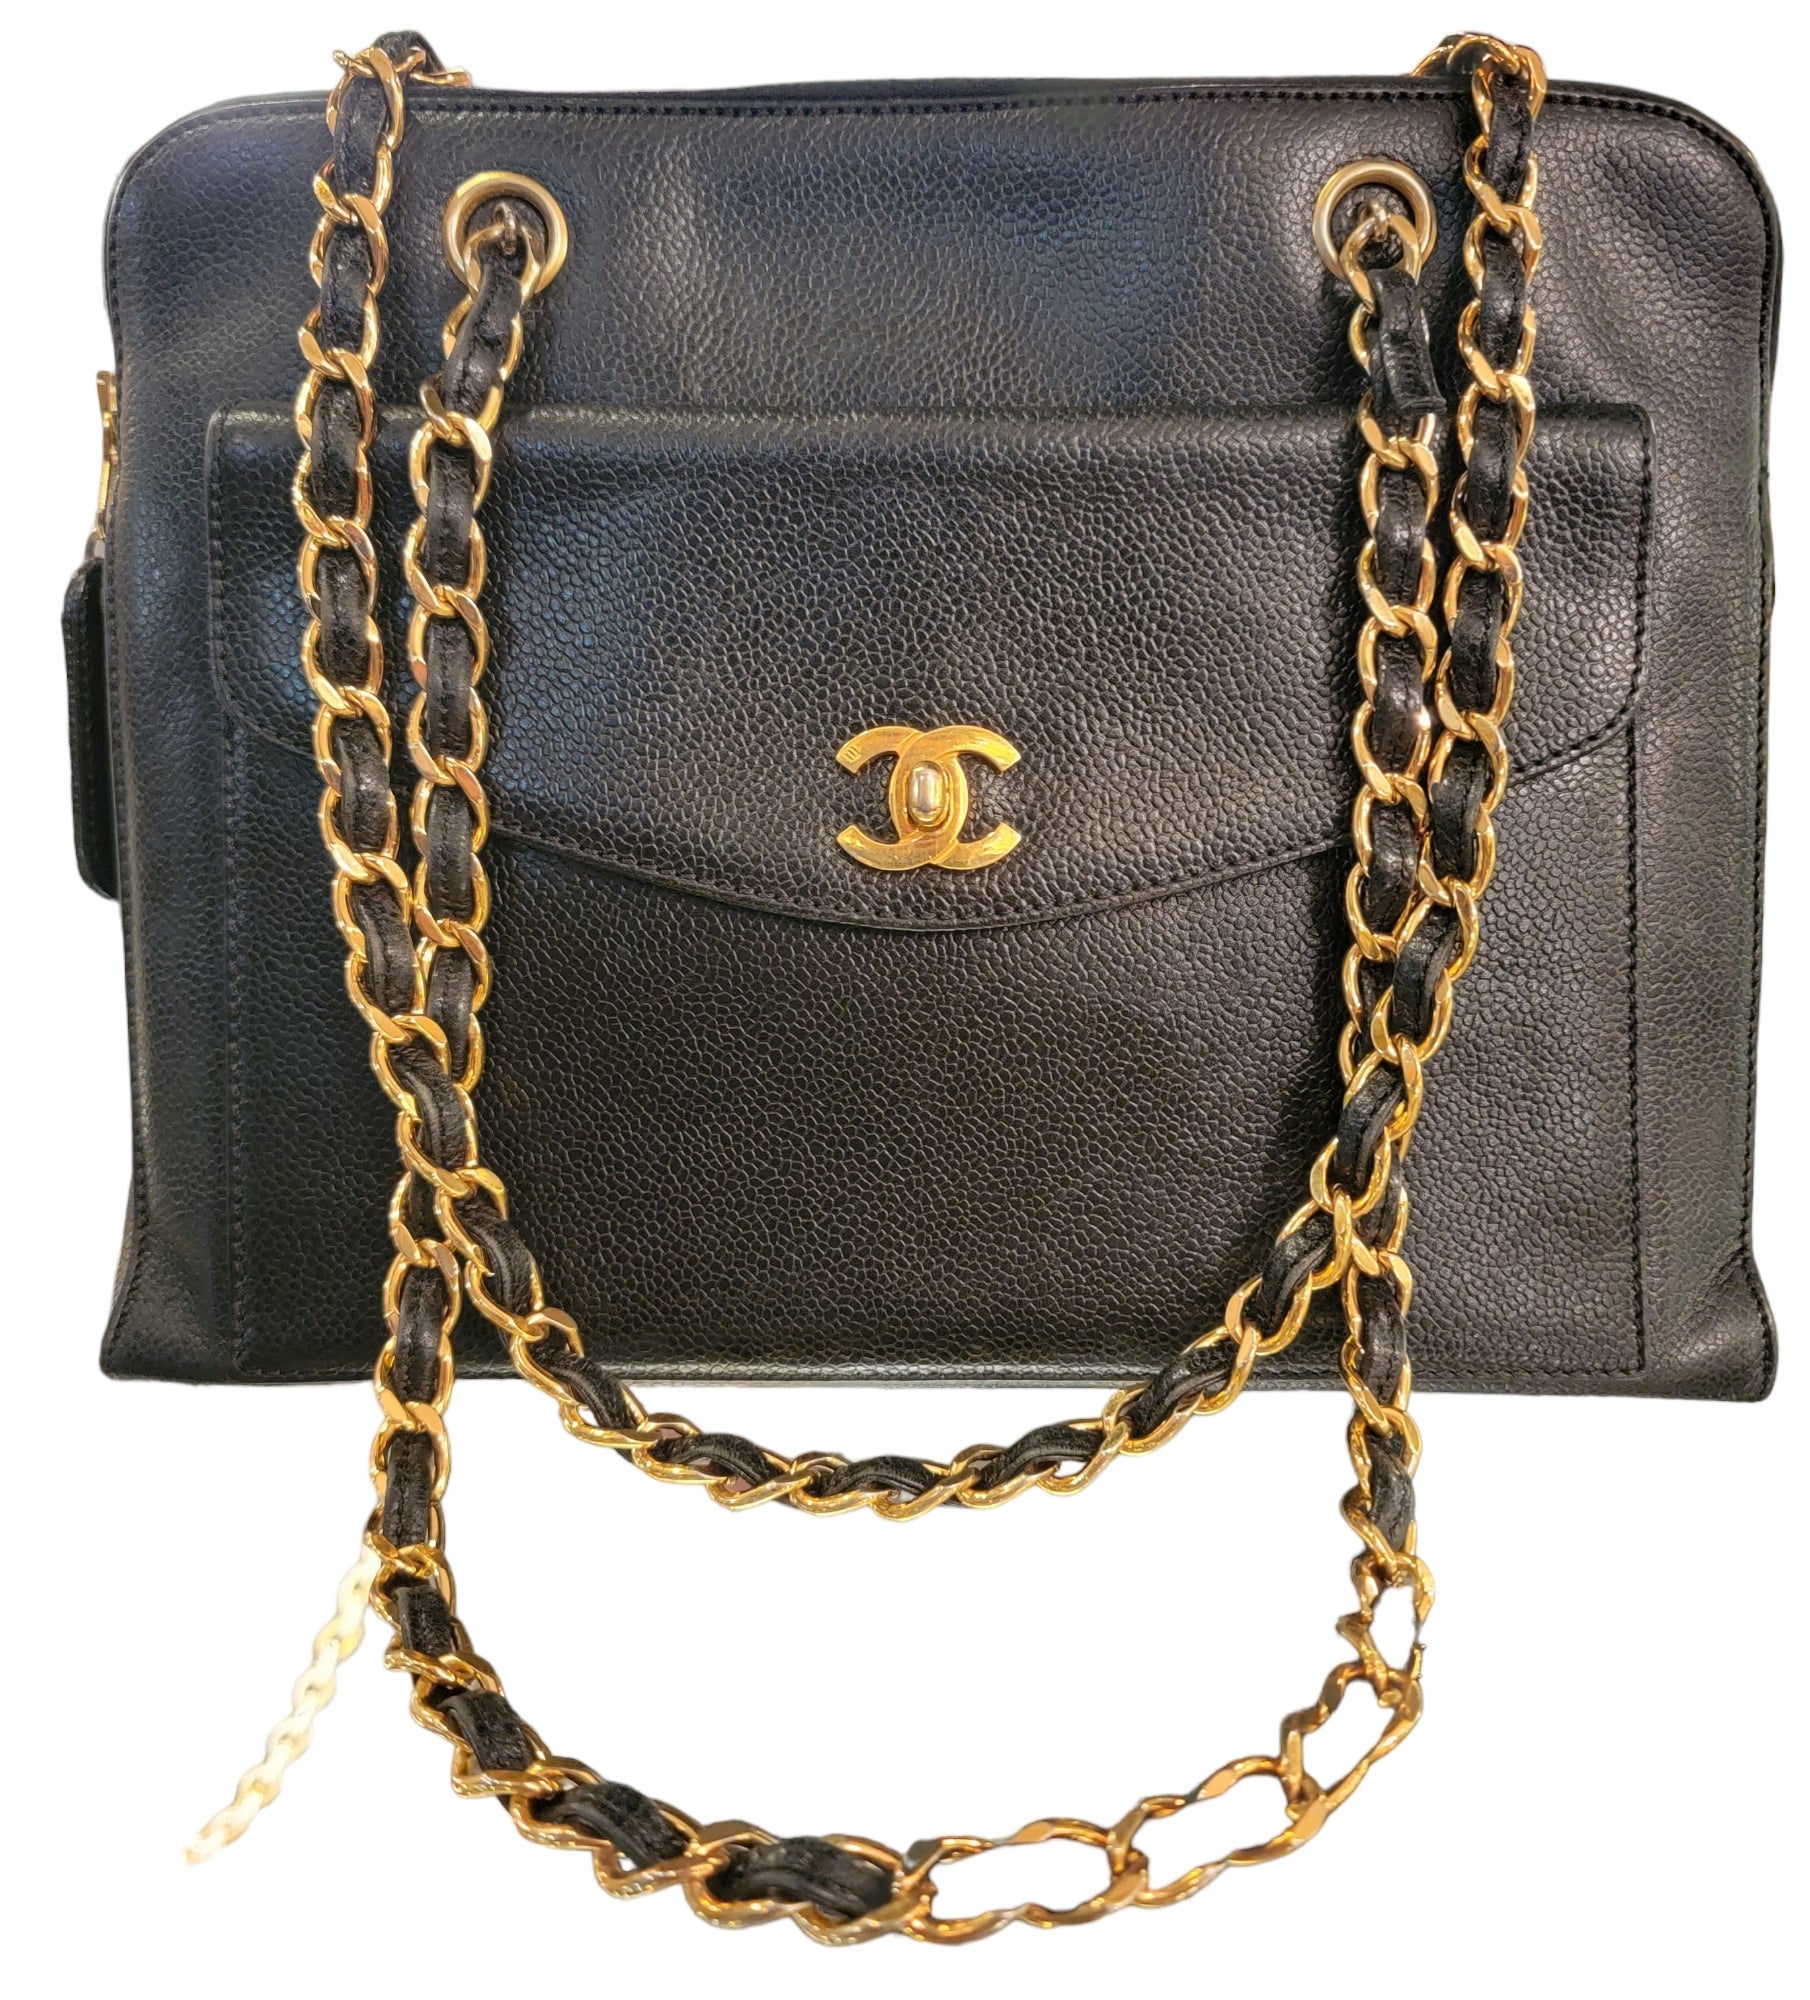 CHANEL Black Caviar Skin Leather Shoulder Bag In Excellent Condition For Sale In Pasadena, CA